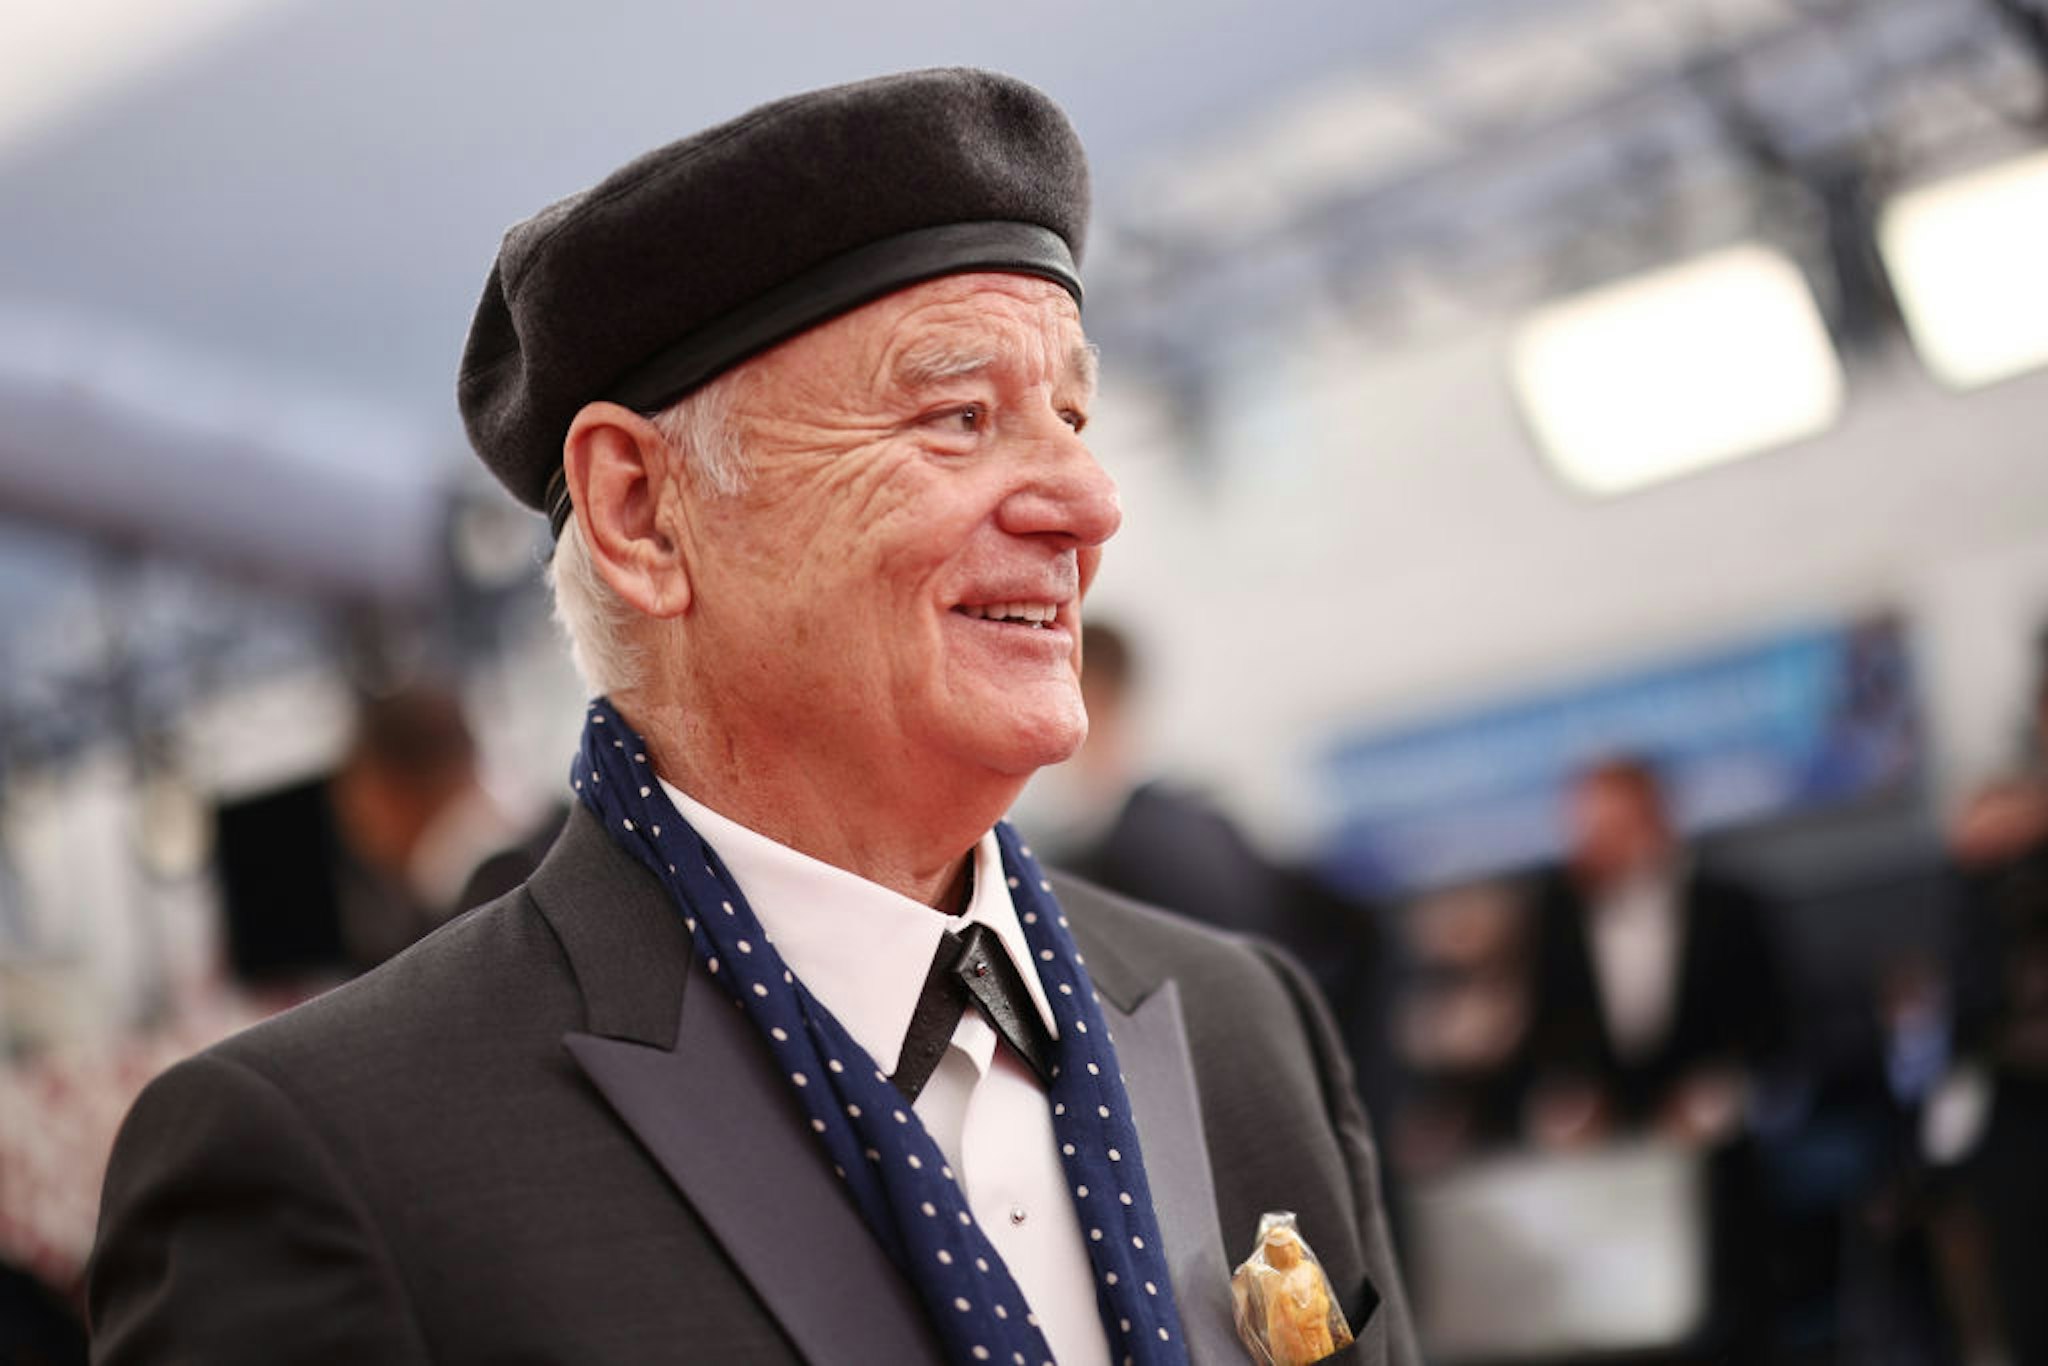 HOLLYWOOD, CALIFORNIA - MARCH 27: Bill Murray attends the 94th Annual Academy Awards at Hollywood and Highland on March 27, 2022 in Hollywood, California. (Photo by Emma McIntyre/Getty Images)